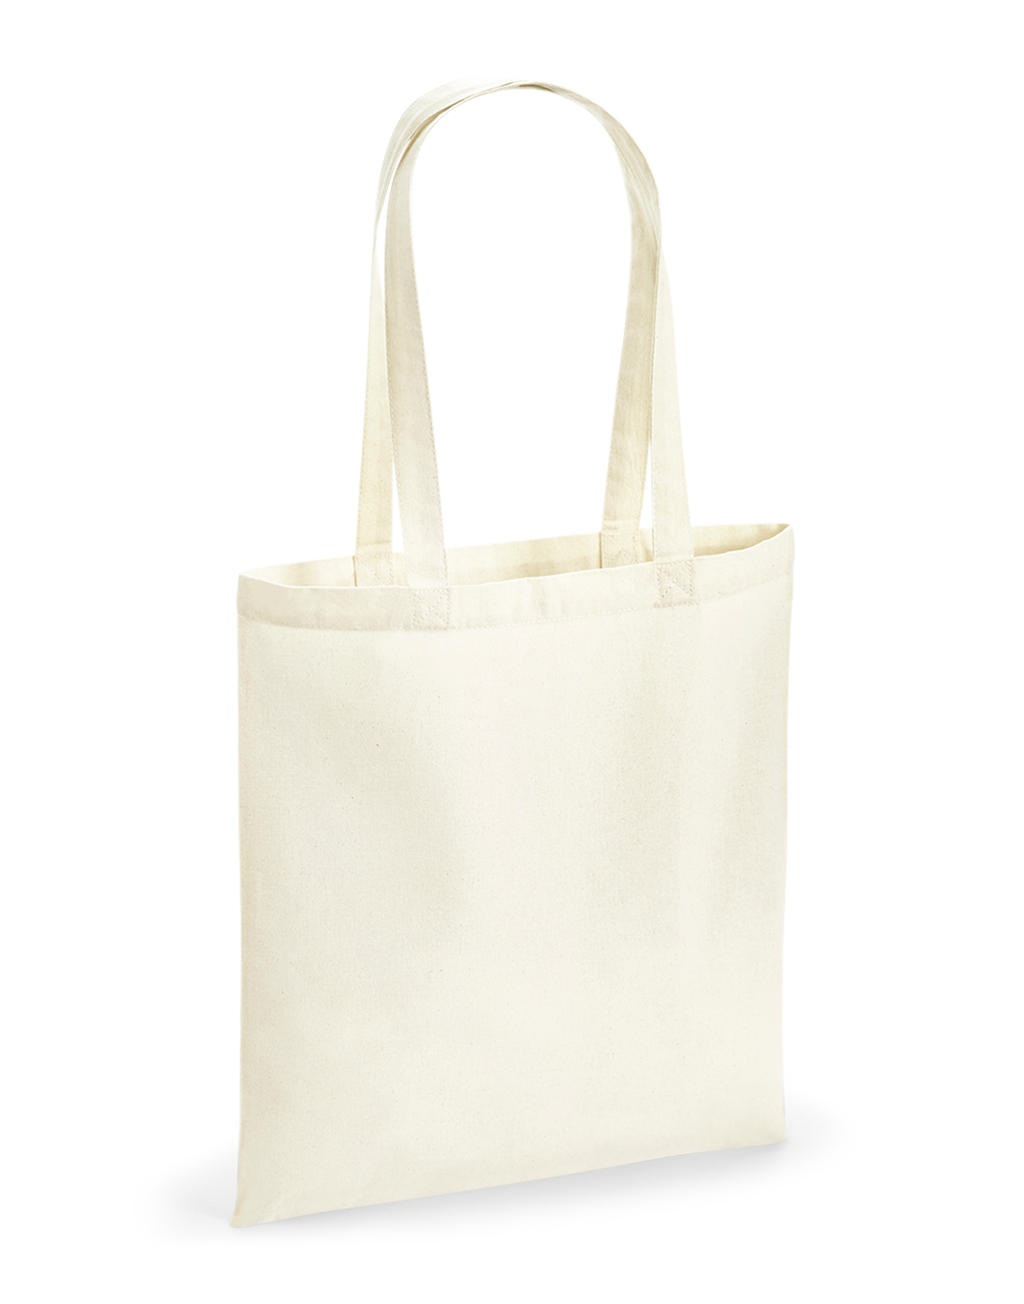  Recycled Cotton Tote in Farbe Natural